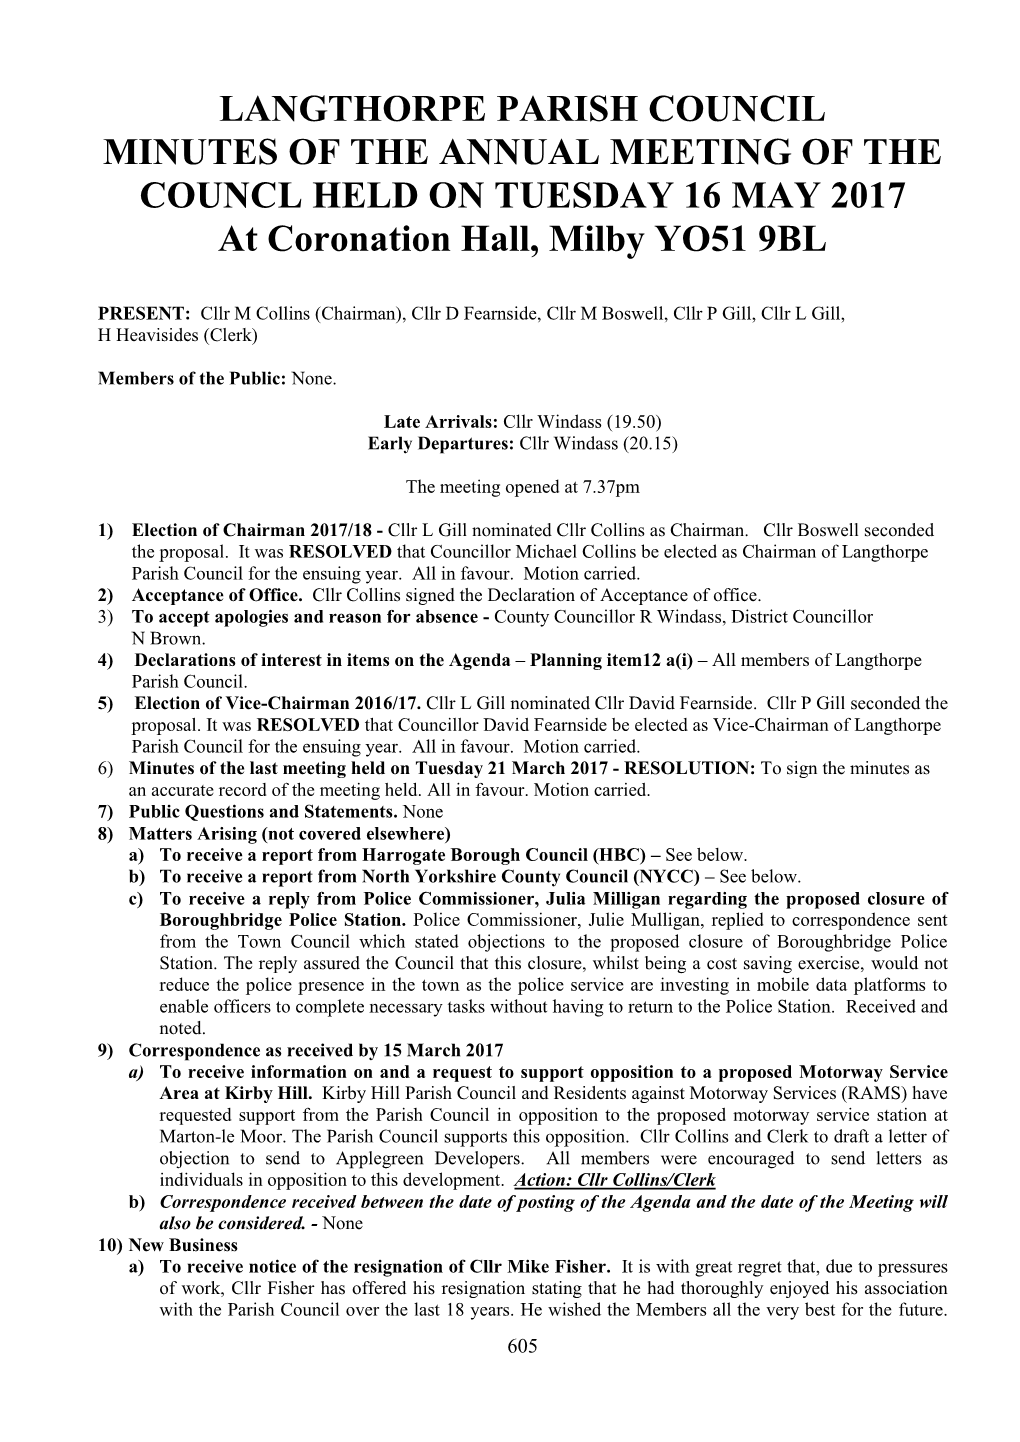 LANGTHORPE PARISH COUNCIL MINUTES of the ANNUAL MEETING of the COUNCL HELD on TUESDAY 16 MAY 2017 at Coronation Hall, Milby YO51 9BL